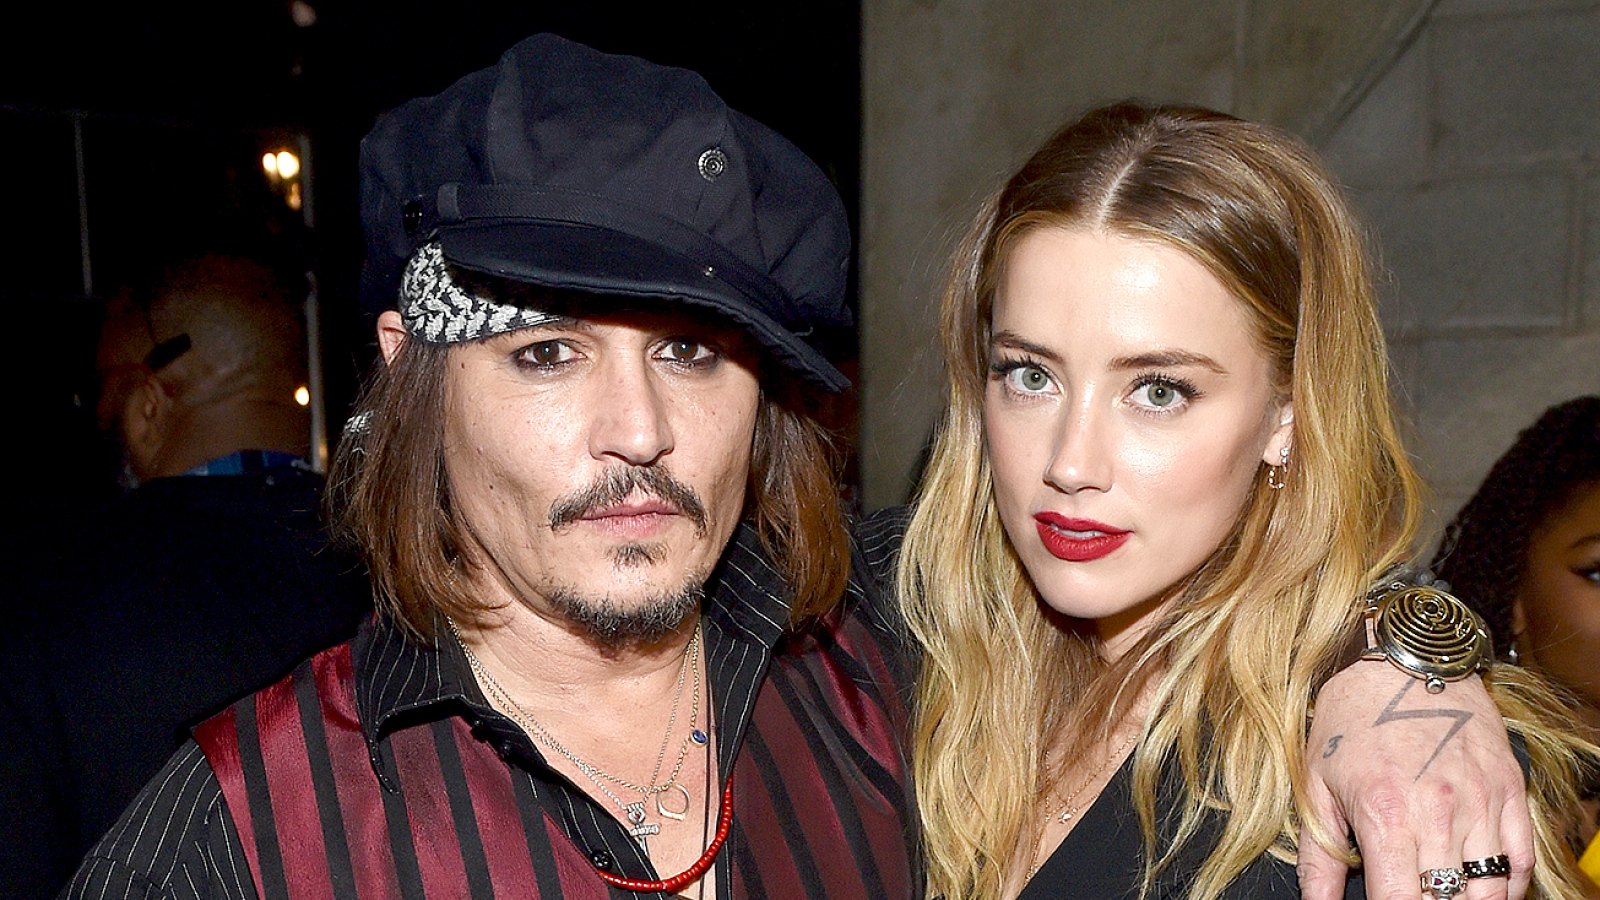 Johnny Depp and Amber Heard attend The 58th GRAMMY Awards at Staples Center on February 15, 2016 in Los Angeles, California.